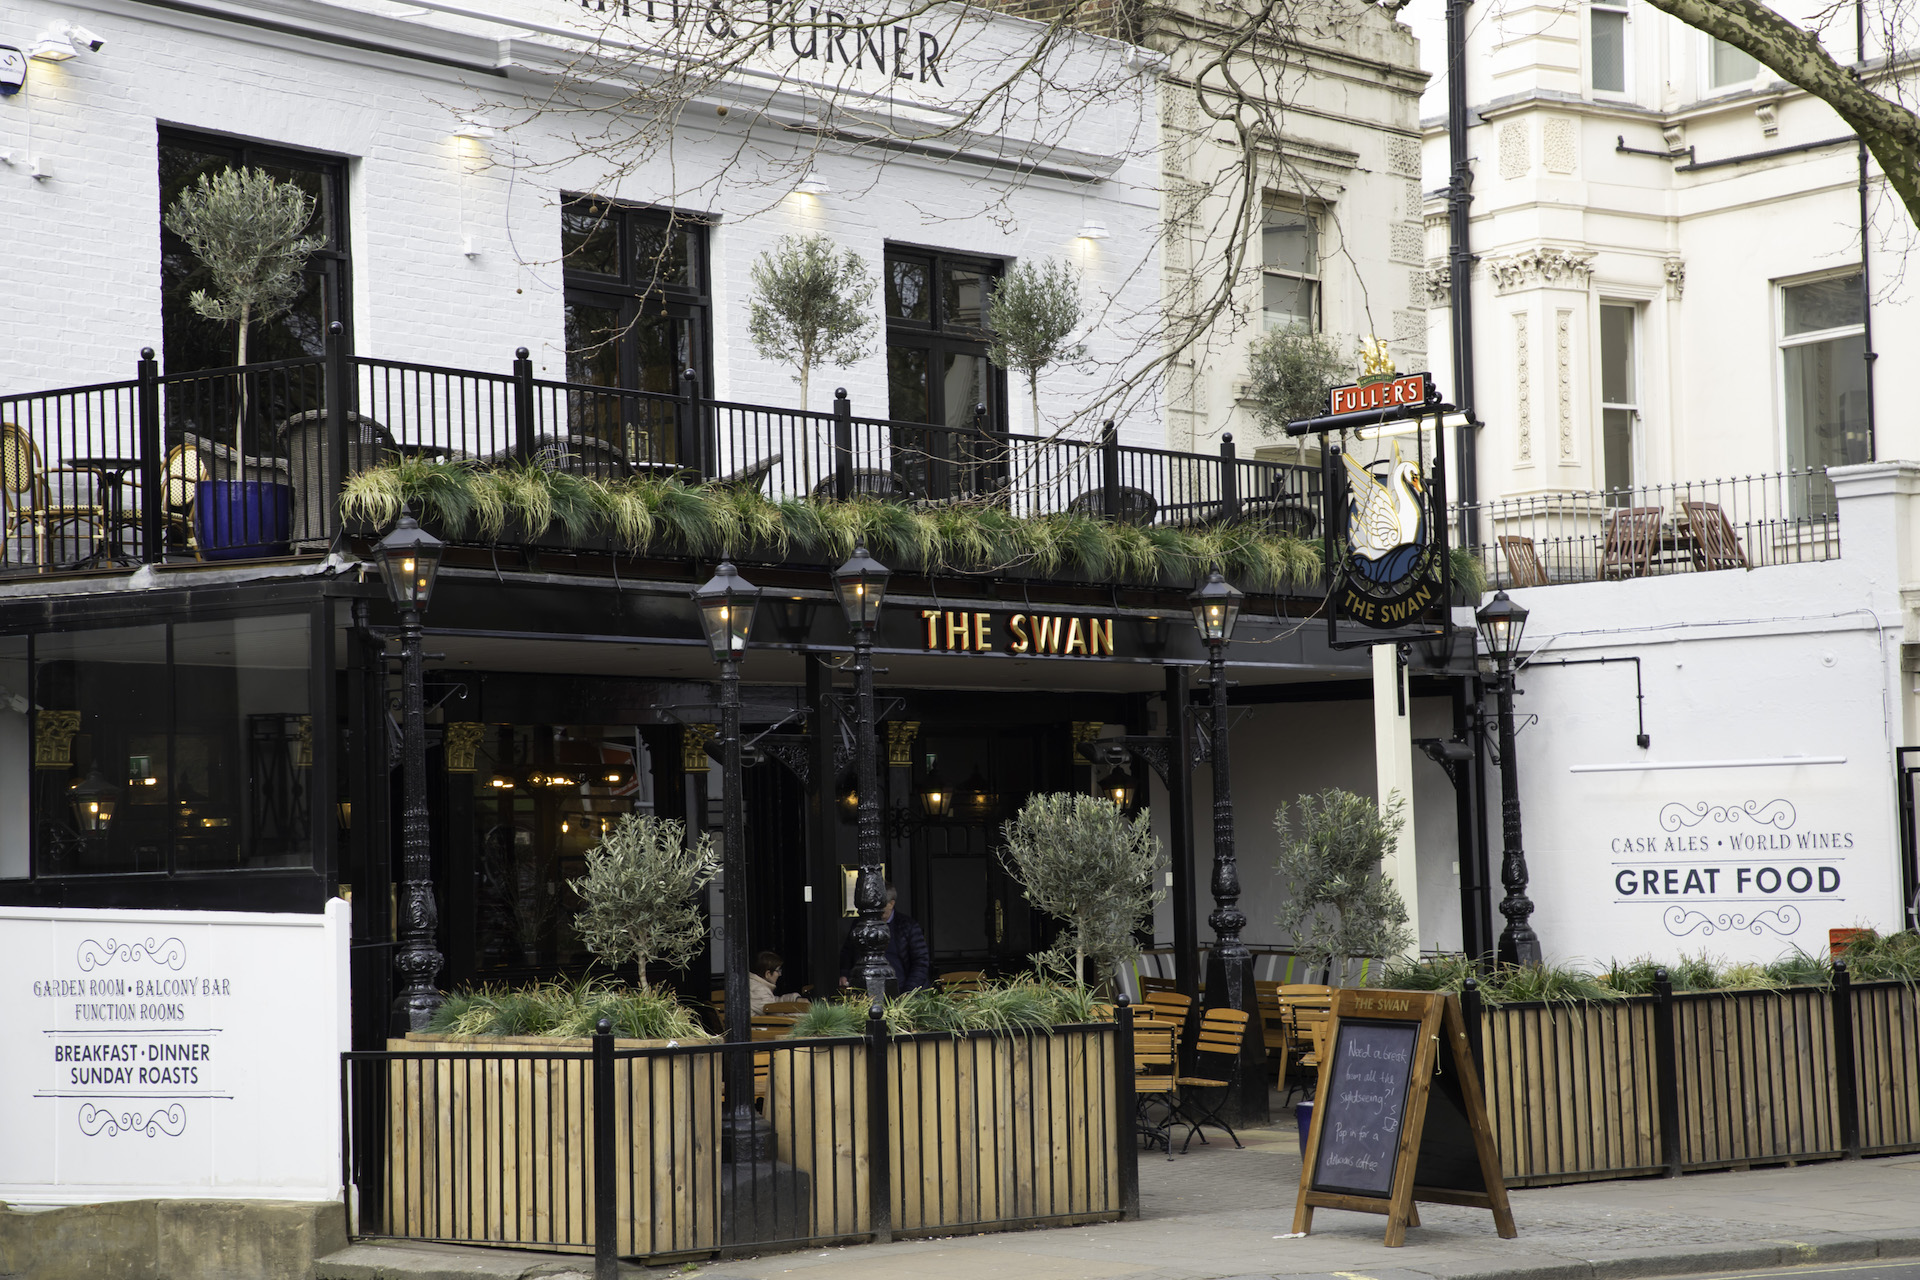 https://www.swanhydepark.co.uk/-/media/sites/pubs-and-hotels/s/the-swan-hyde-park-_-p147/images/carousel-2022/676a3626.ashx